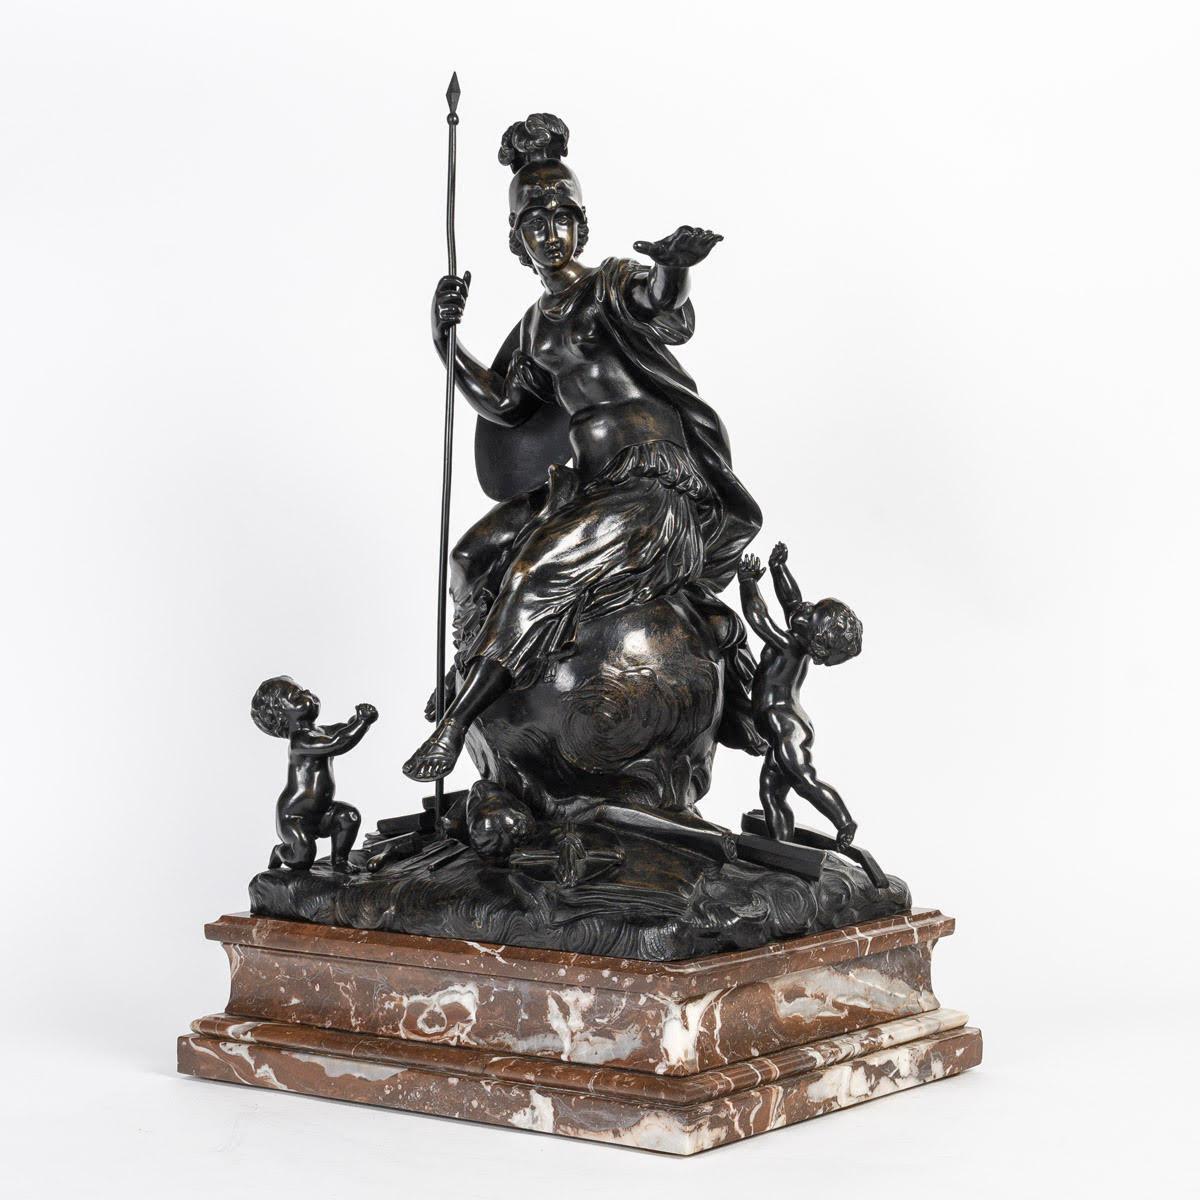 19th Century Bronze Sculpture of a Helmeted Woman Surrounded by Cherubs, Napoleon III Period. For Sale